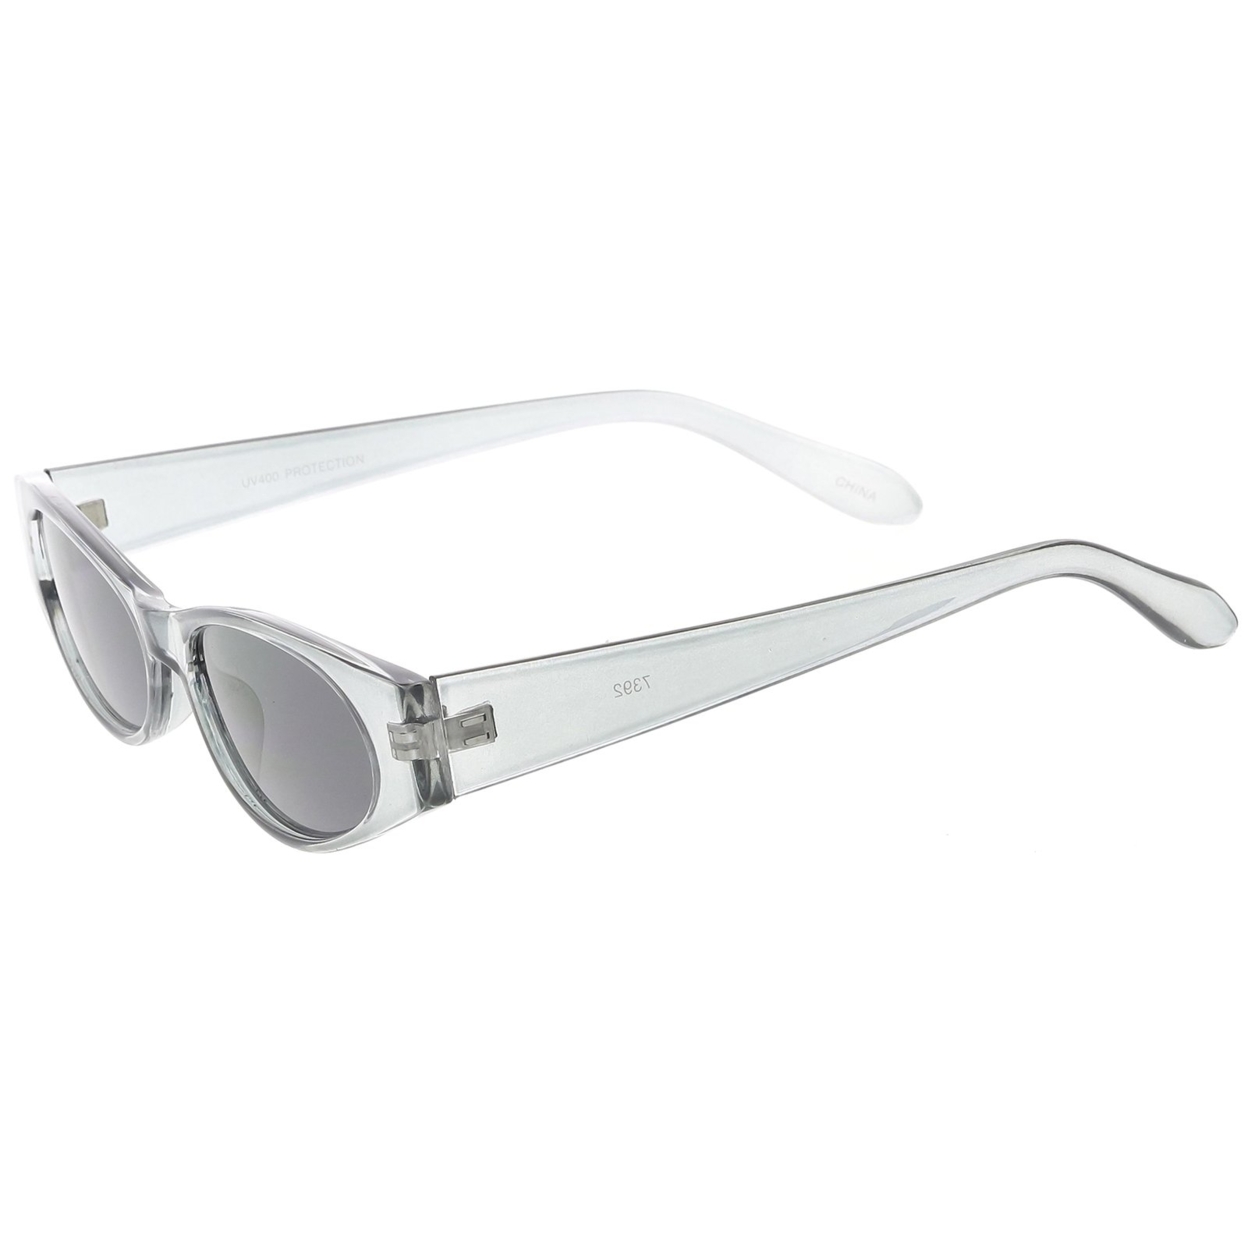 Extreme Thick Oval Sunglasses Neutral Colored Lens 53mm - White / Smoke